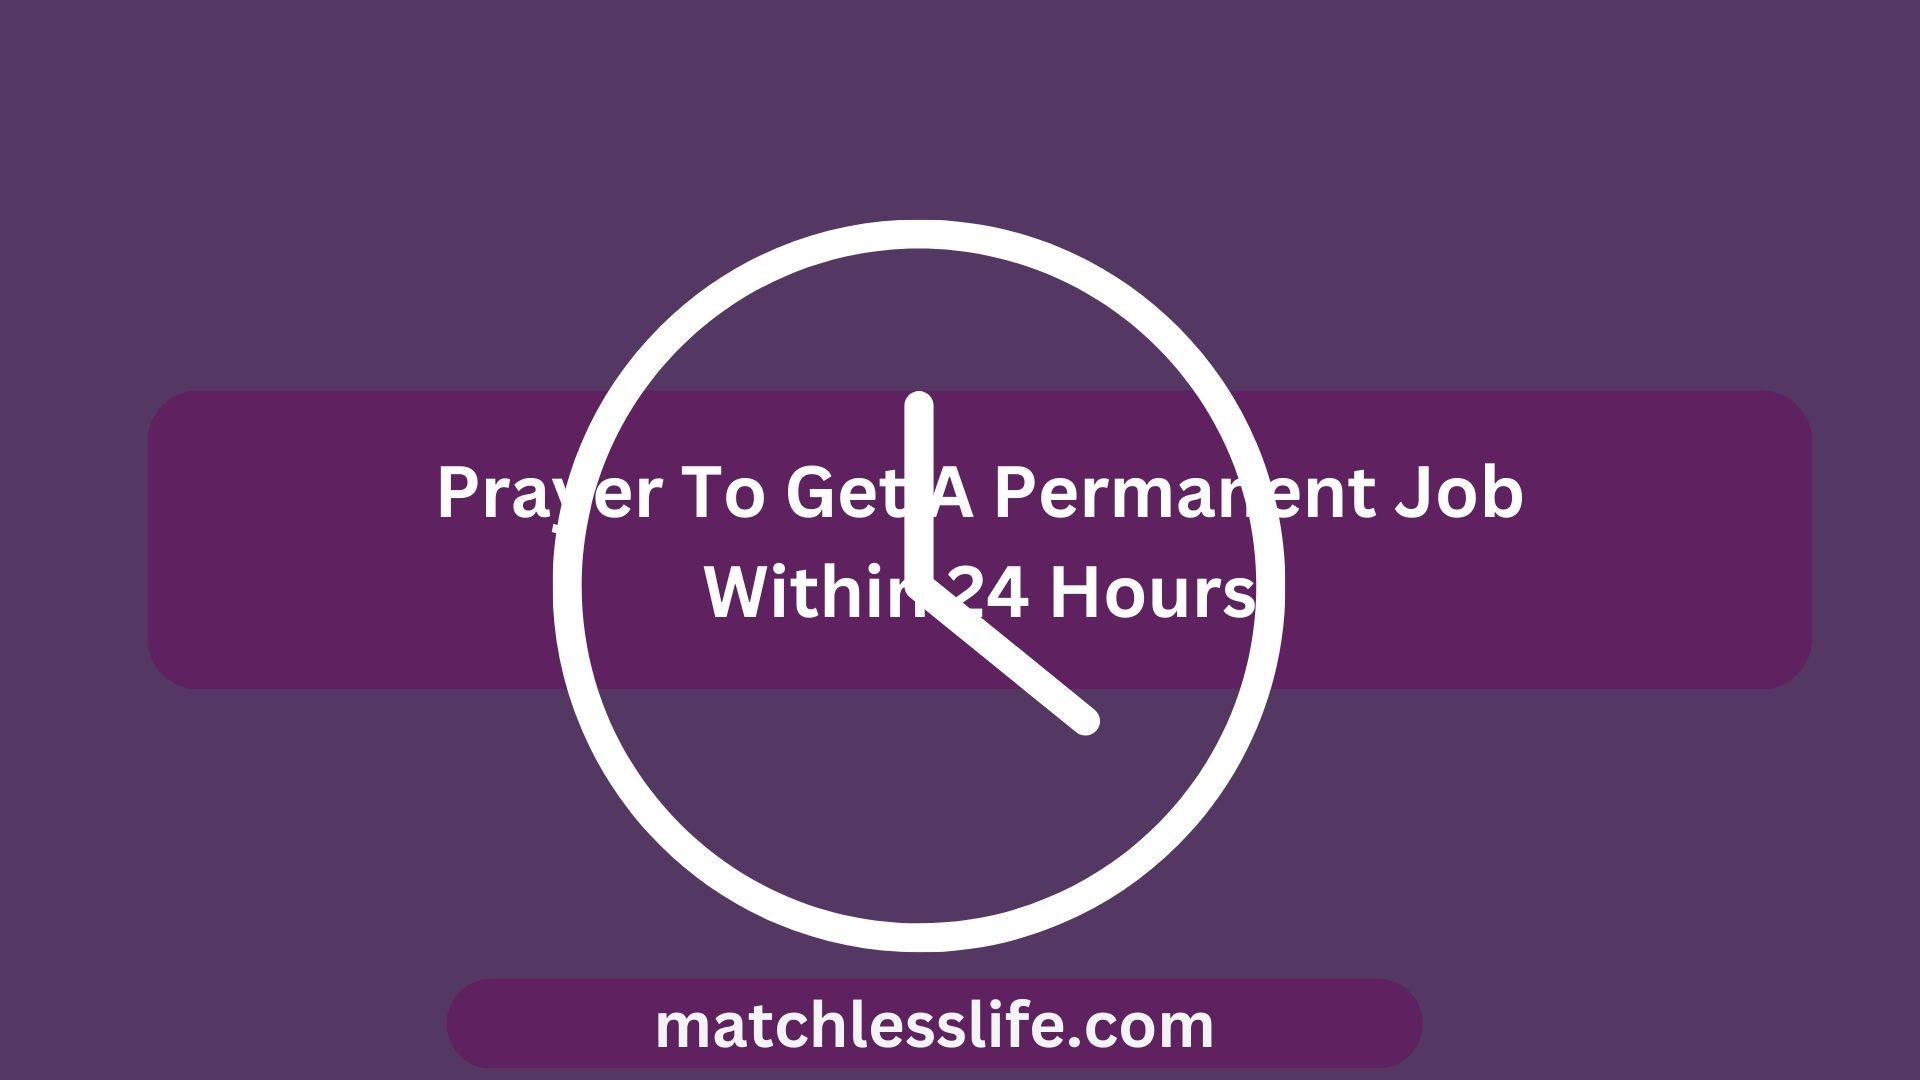 Prayer To Get A Permanent Job Within 24 Hours